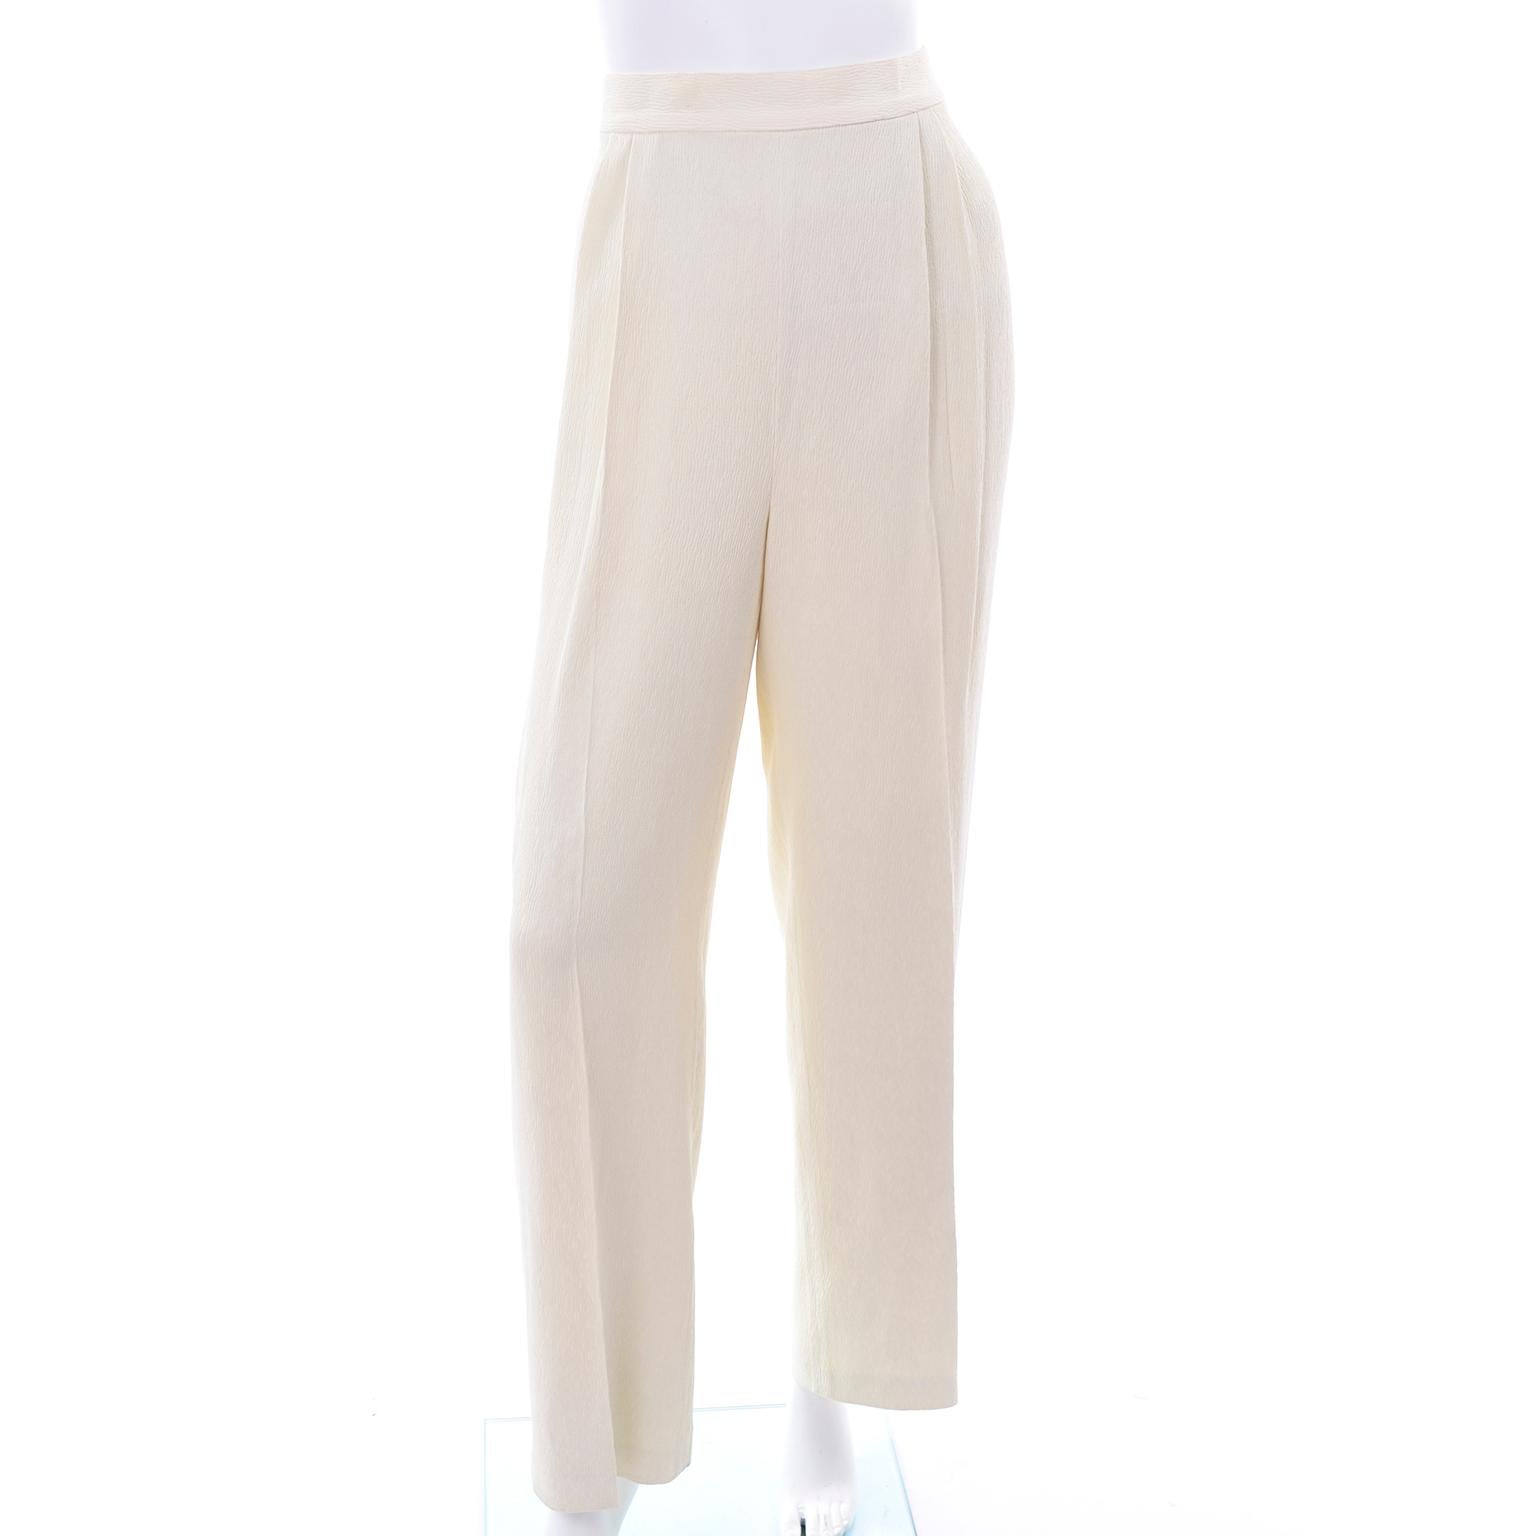 Valentino Cream Cashmere Sweater Ivory Lace Wrap Top & Textured High Waist Pants 7